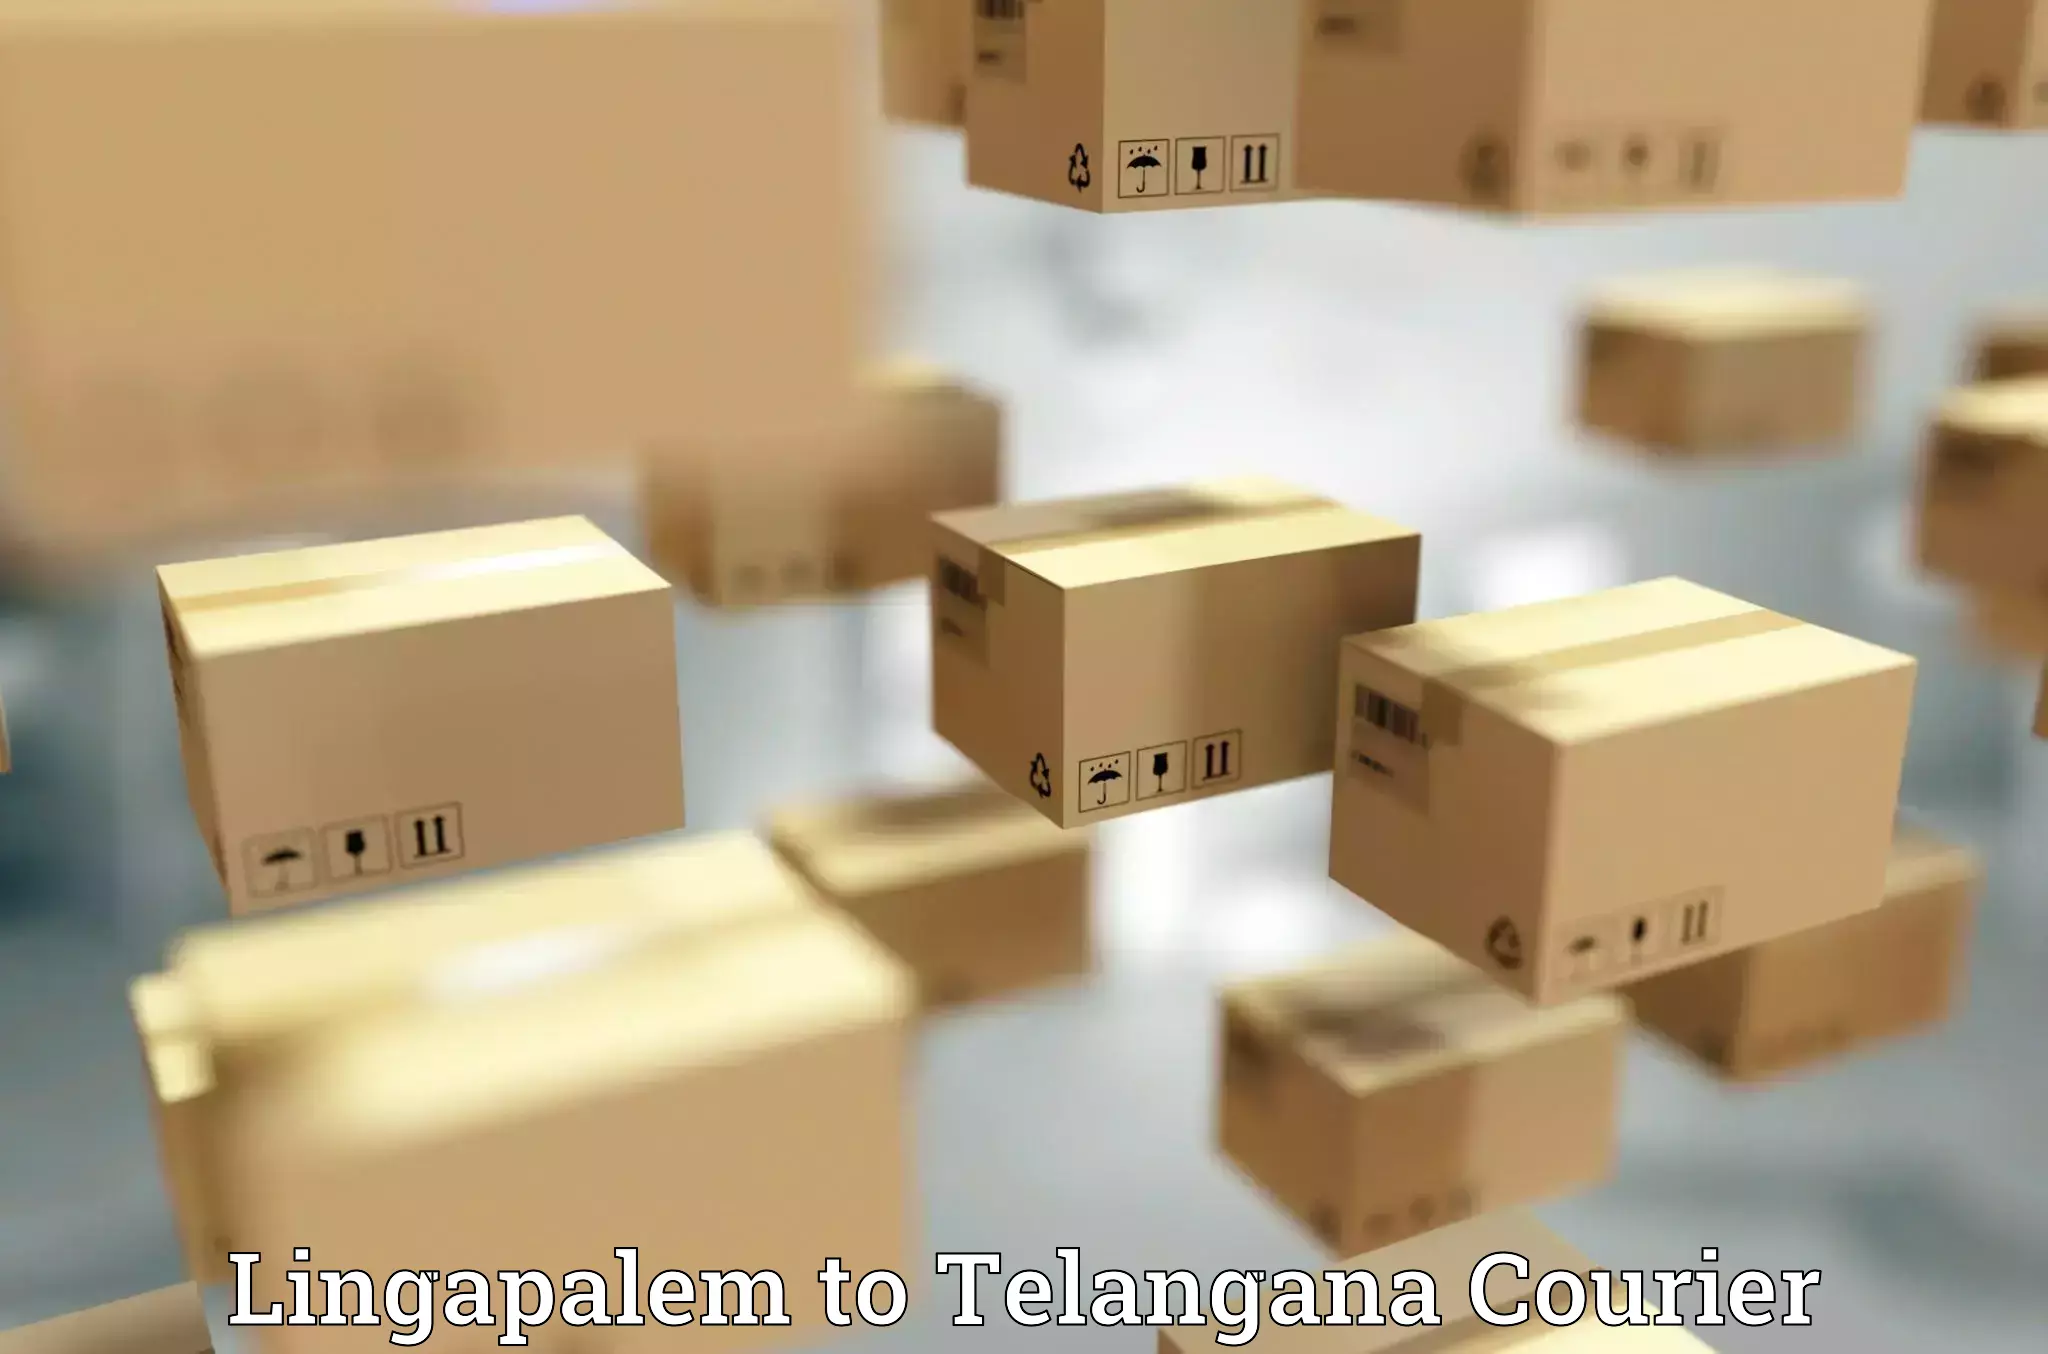 Reliable courier service Lingapalem to Bodhan